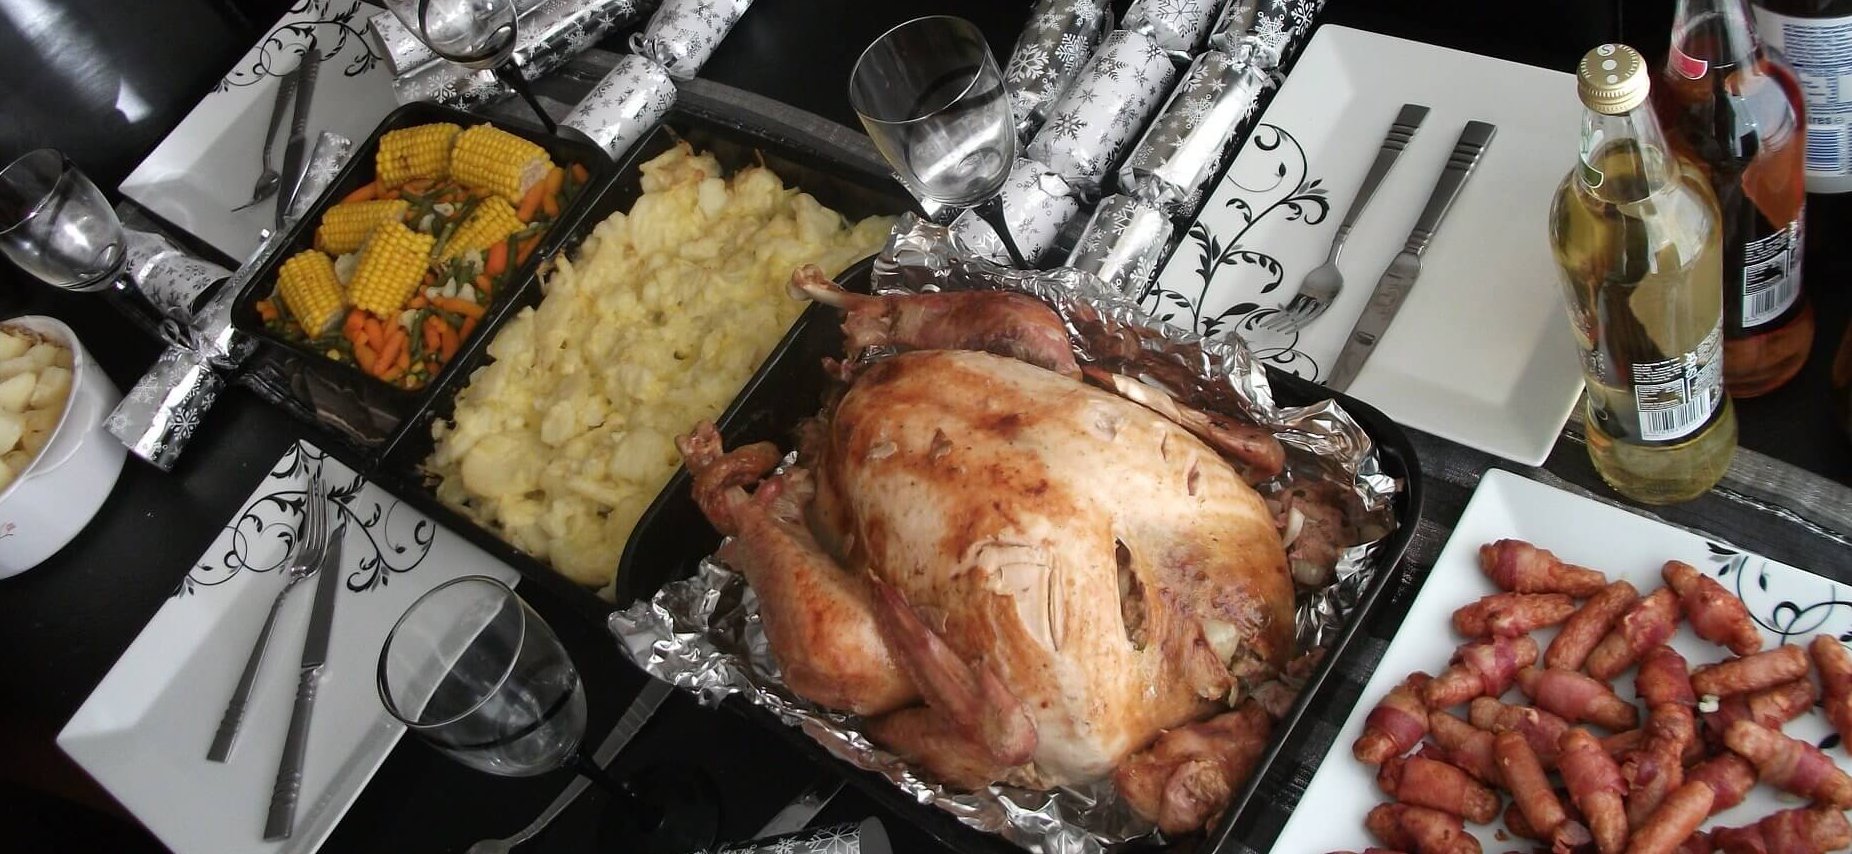 watch out for allergies and intolerances over Christmas dinner